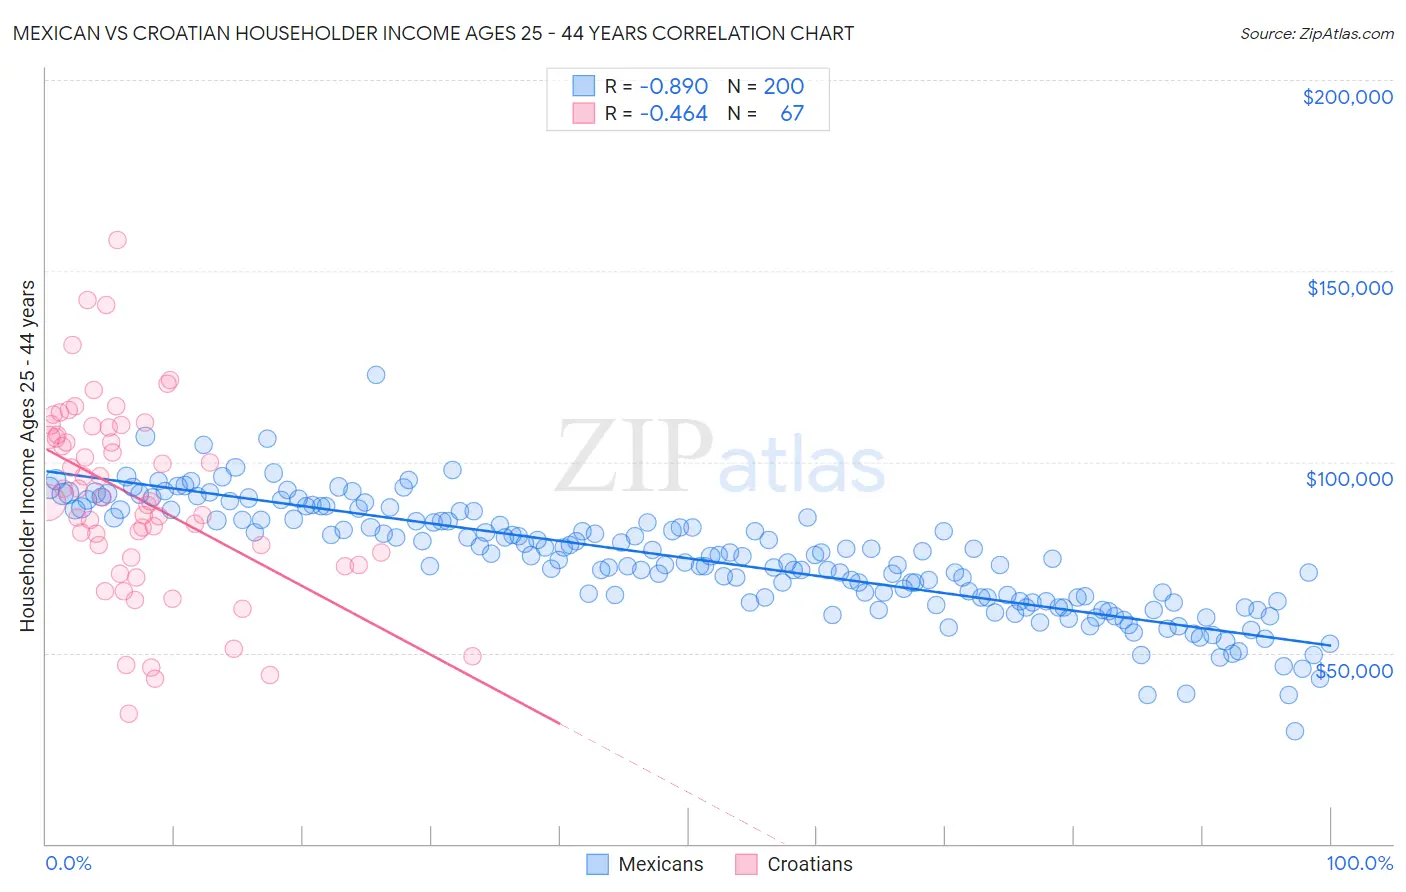 Mexican vs Croatian Householder Income Ages 25 - 44 years